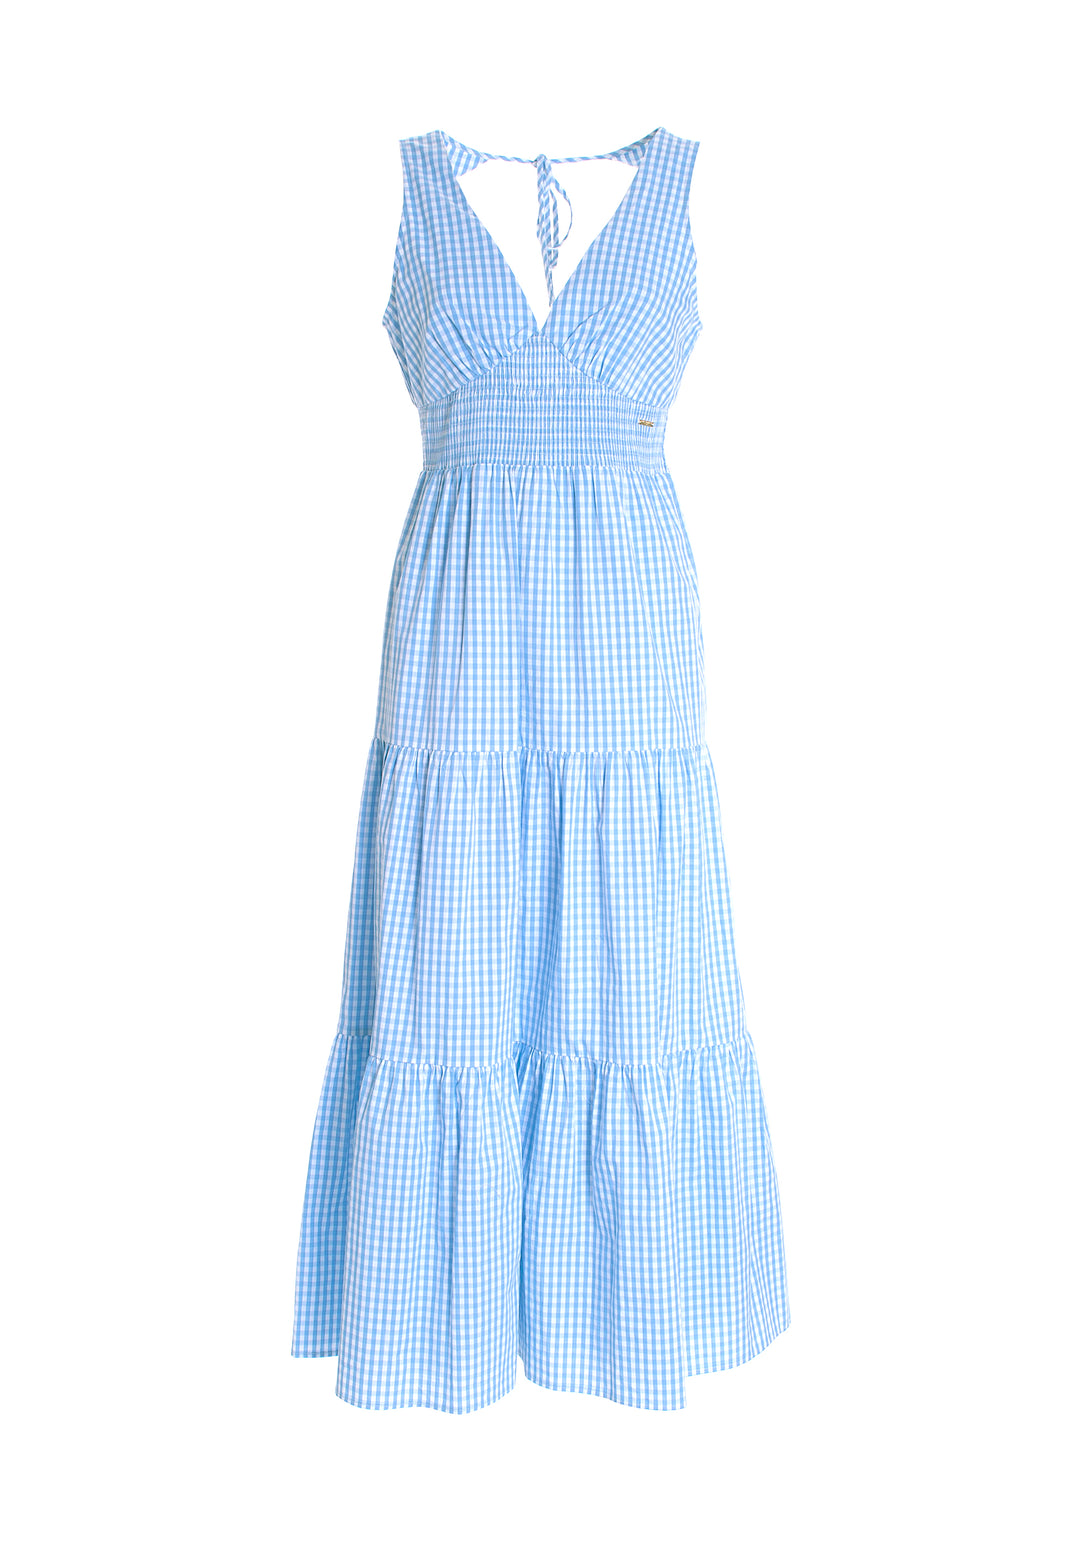 Long dress with no sleeves made in vichy cotton